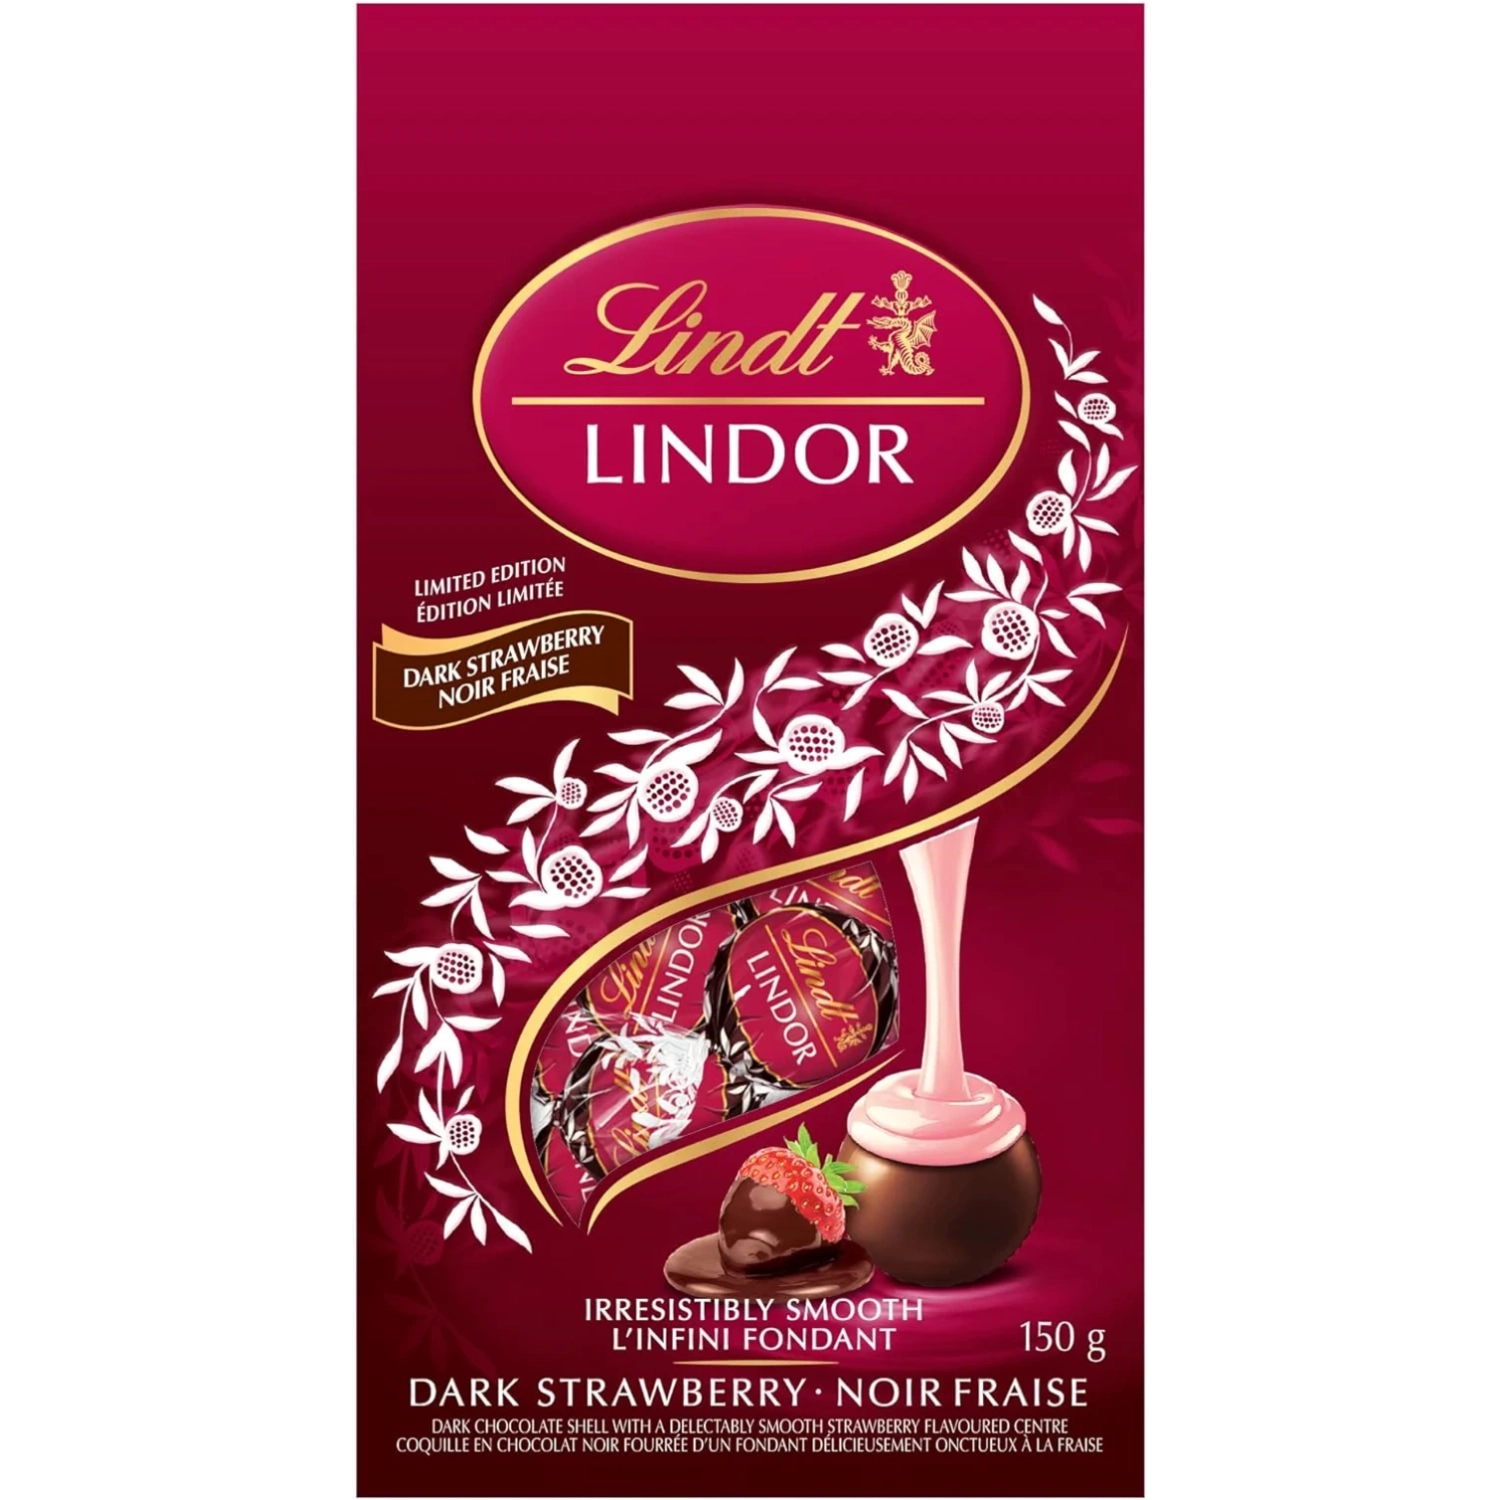 Lindt Lindor Dark Chocolate Strawberry Truffles - Irresistible 150g Bag for a Rich and Romantic Valentine's Day Treat